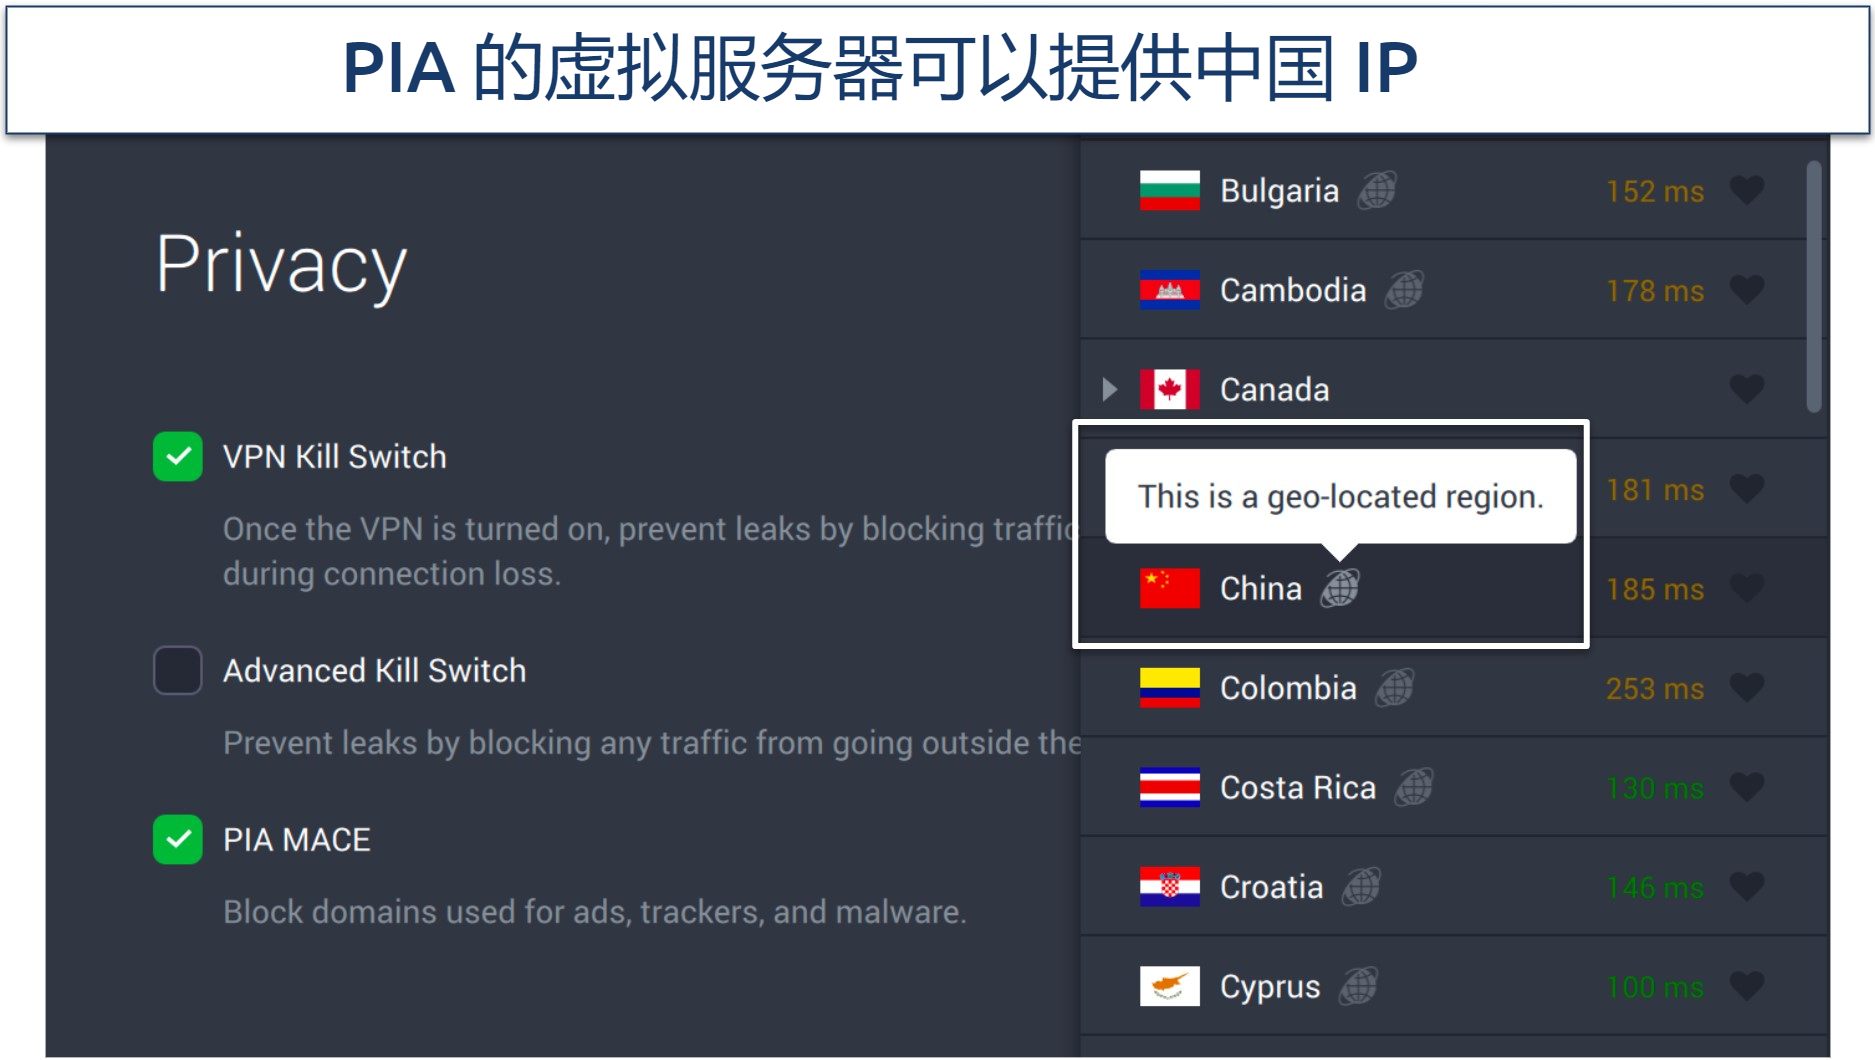 Screenshot of PIA's privacy settings and virtual servers in the app